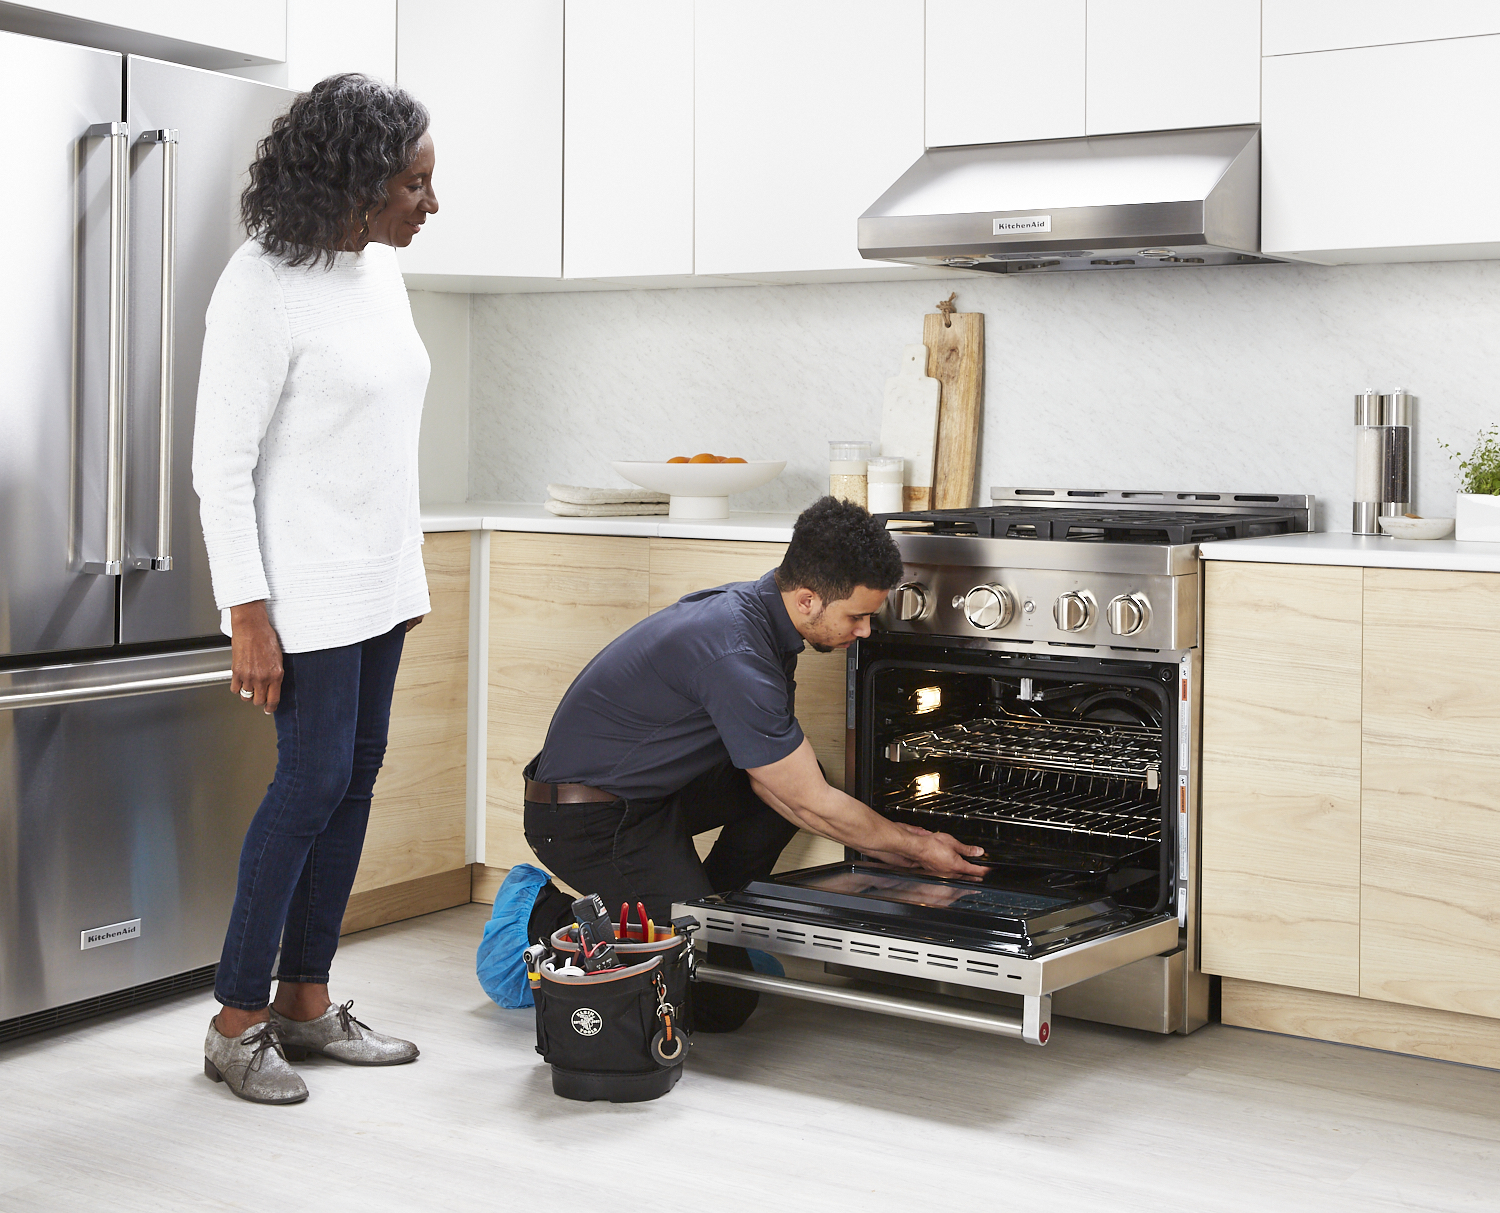 oven repair technician diagnosing an oven issue